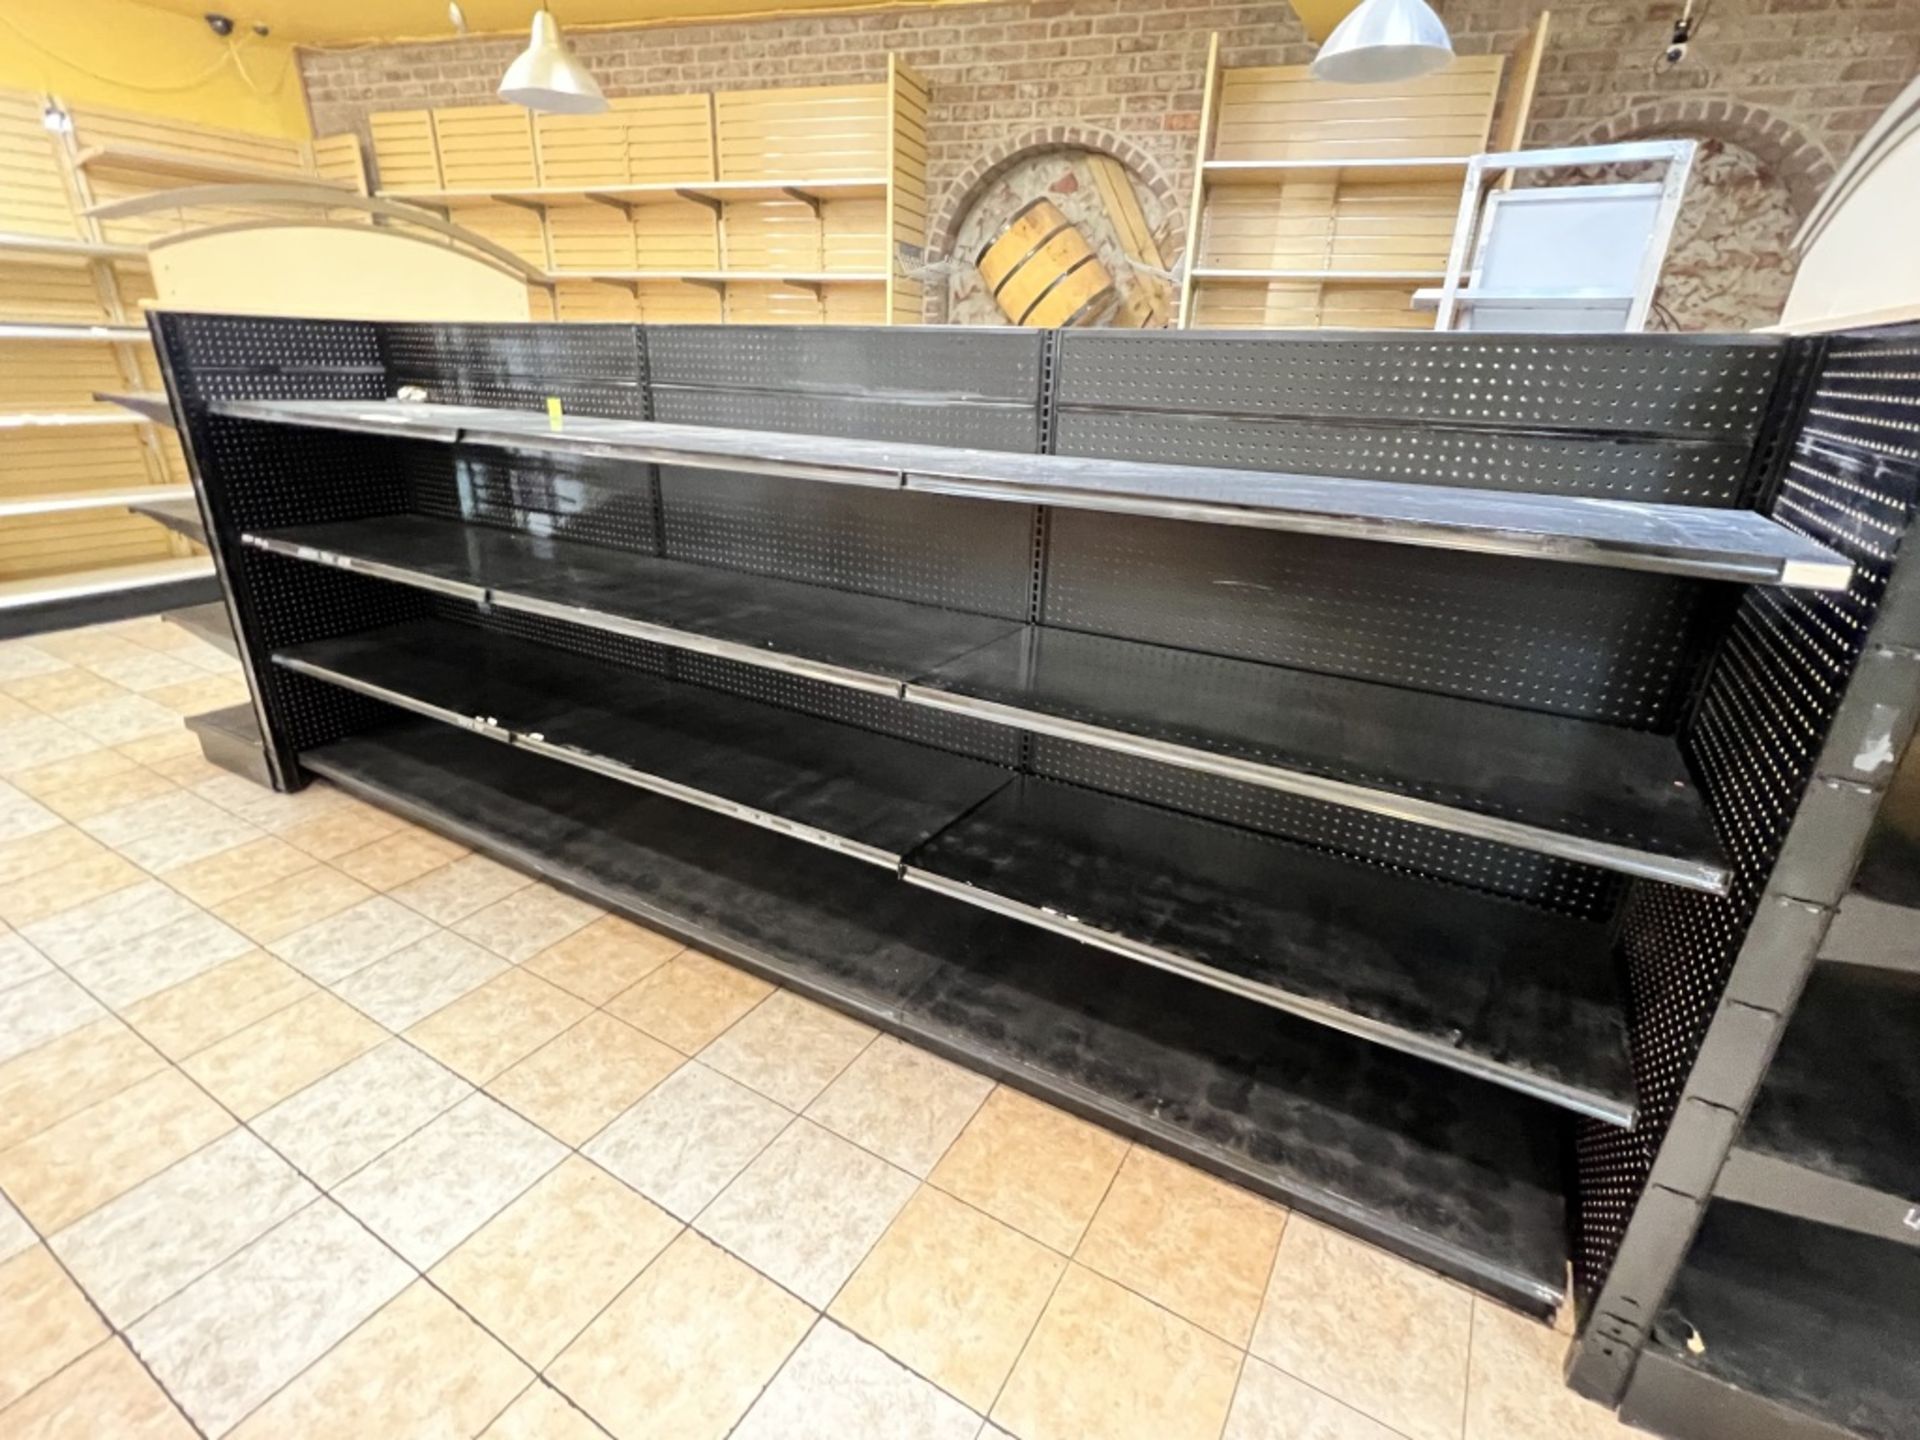 8 Section adjustable Gondola shelving system Approximately 195” Long X 50” Wide with 2 archways o - Image 4 of 12